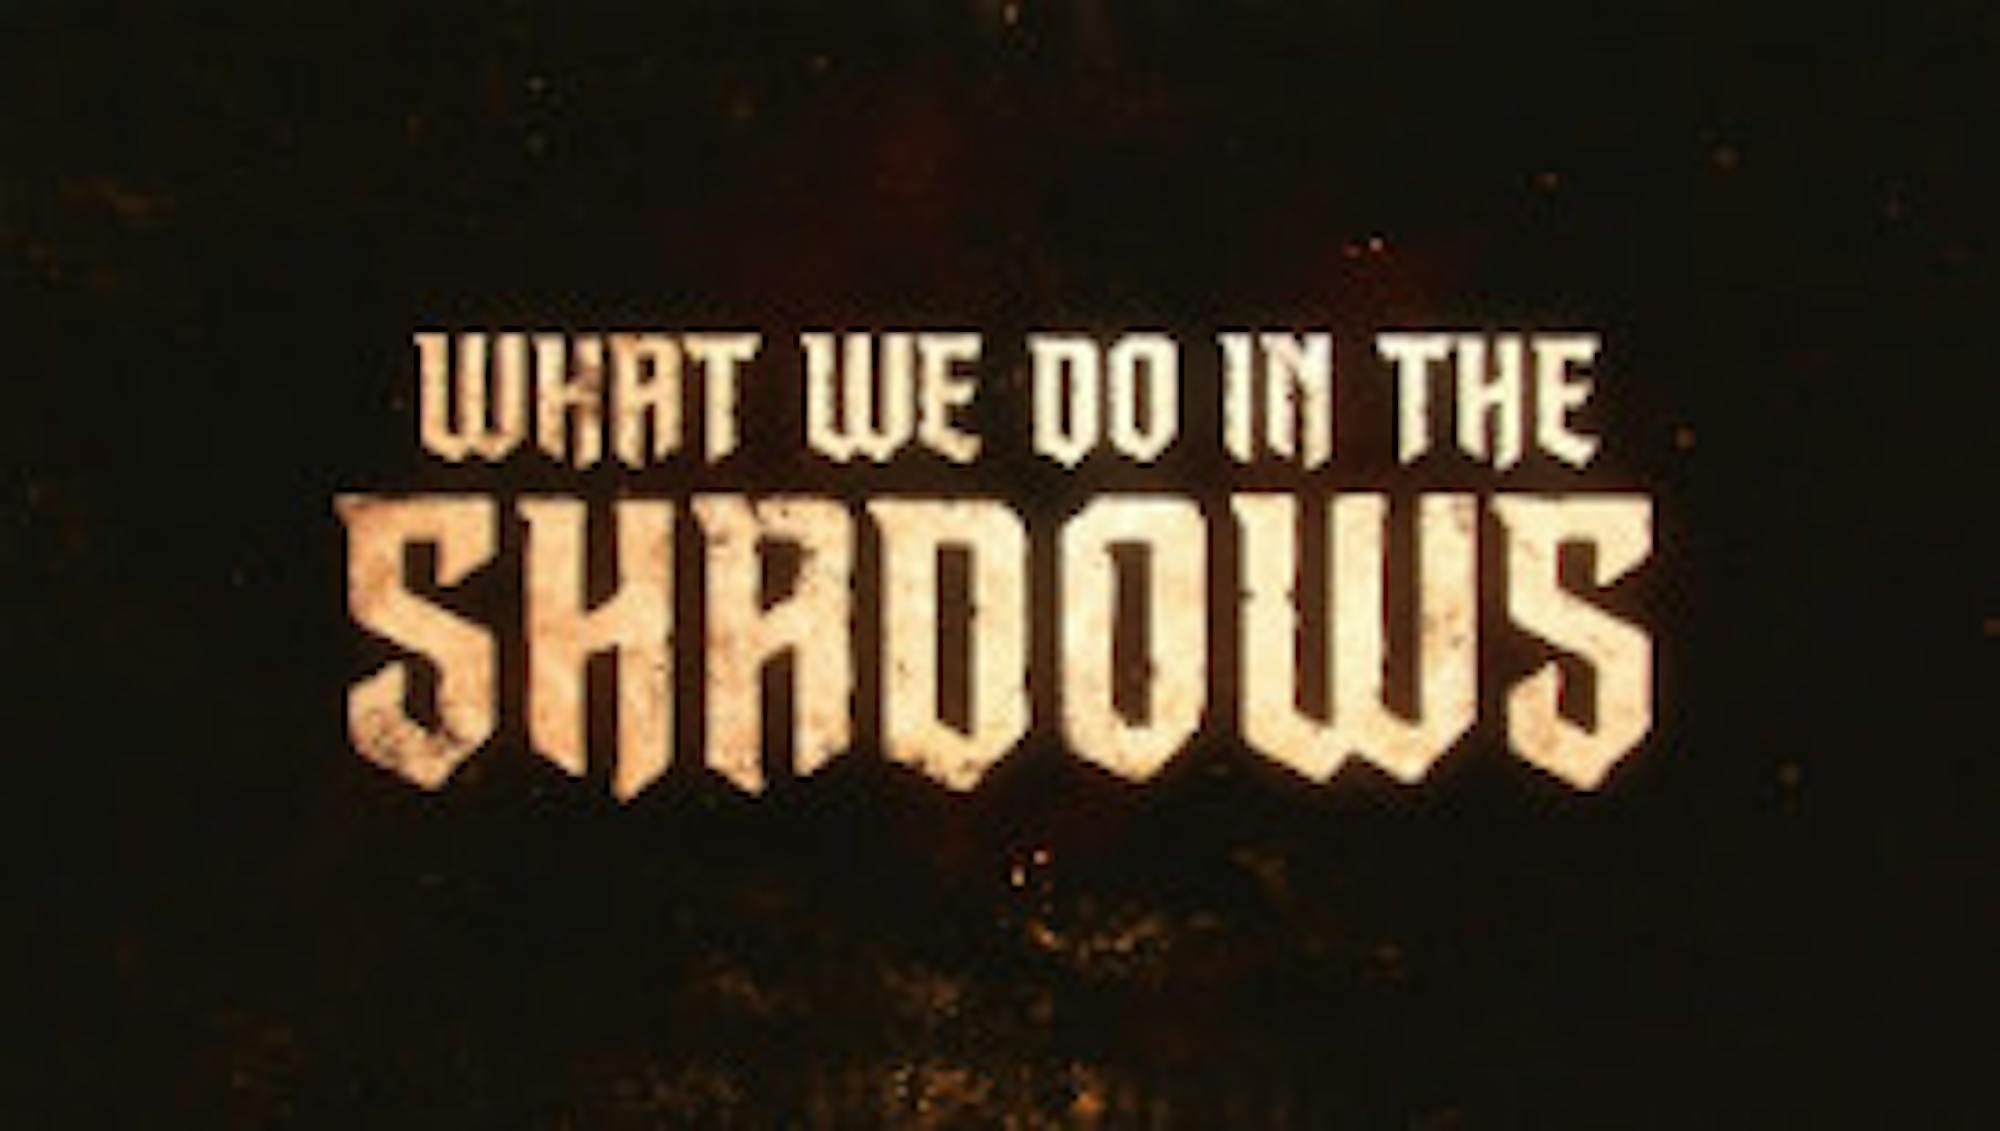 What_We_Do_in_the_Shadows_Title_Card